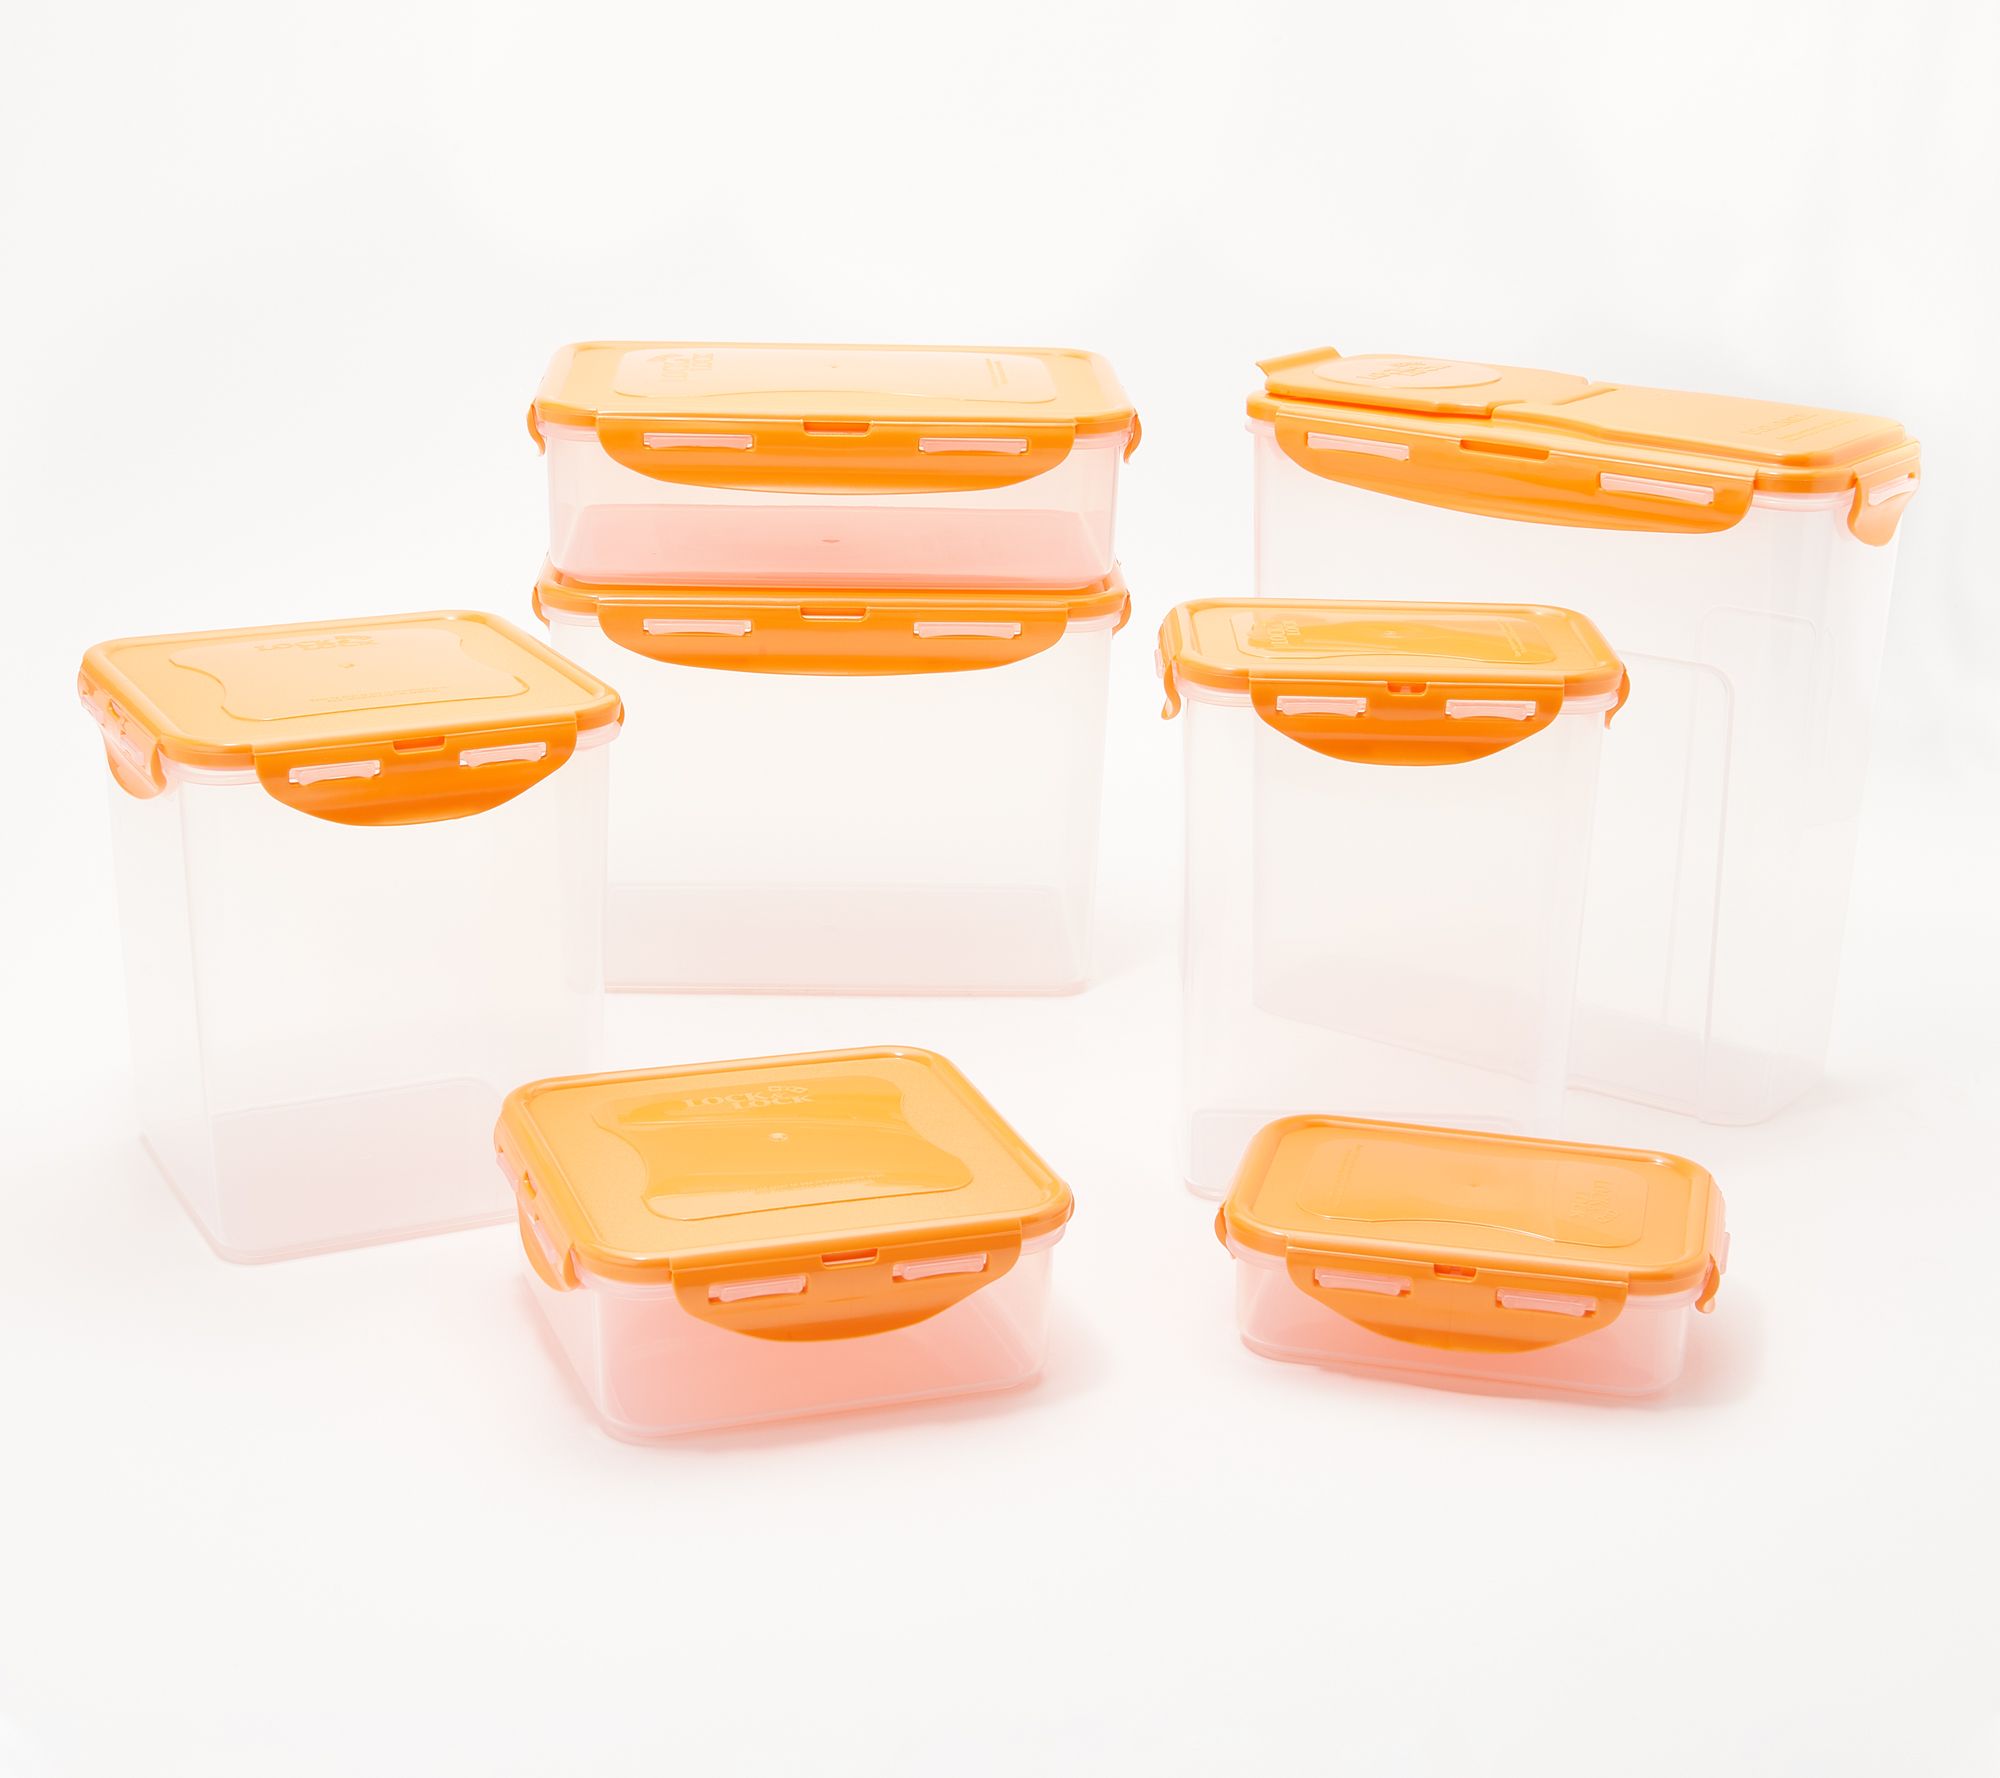 MAMA DAILY Portable Stackable Baby Food Container, Leak-Proof